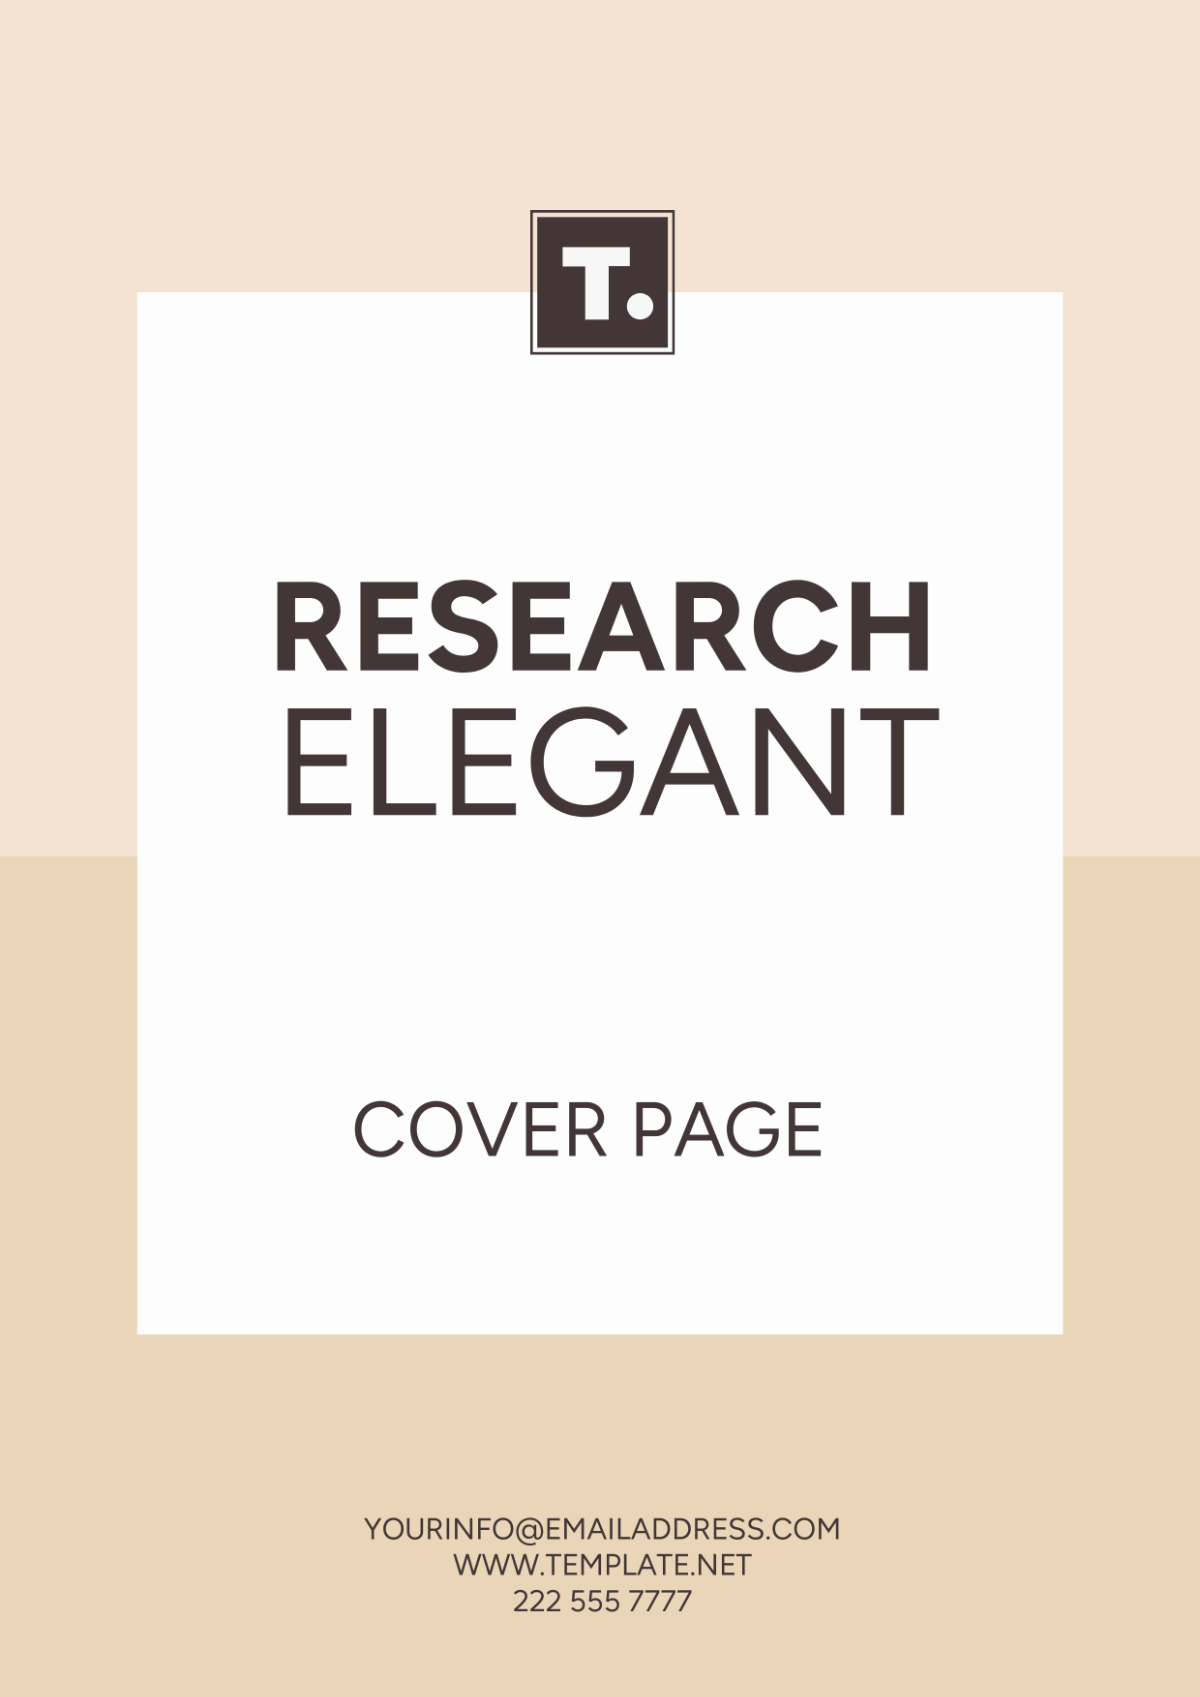 Free Research Elegant Cover Page Template